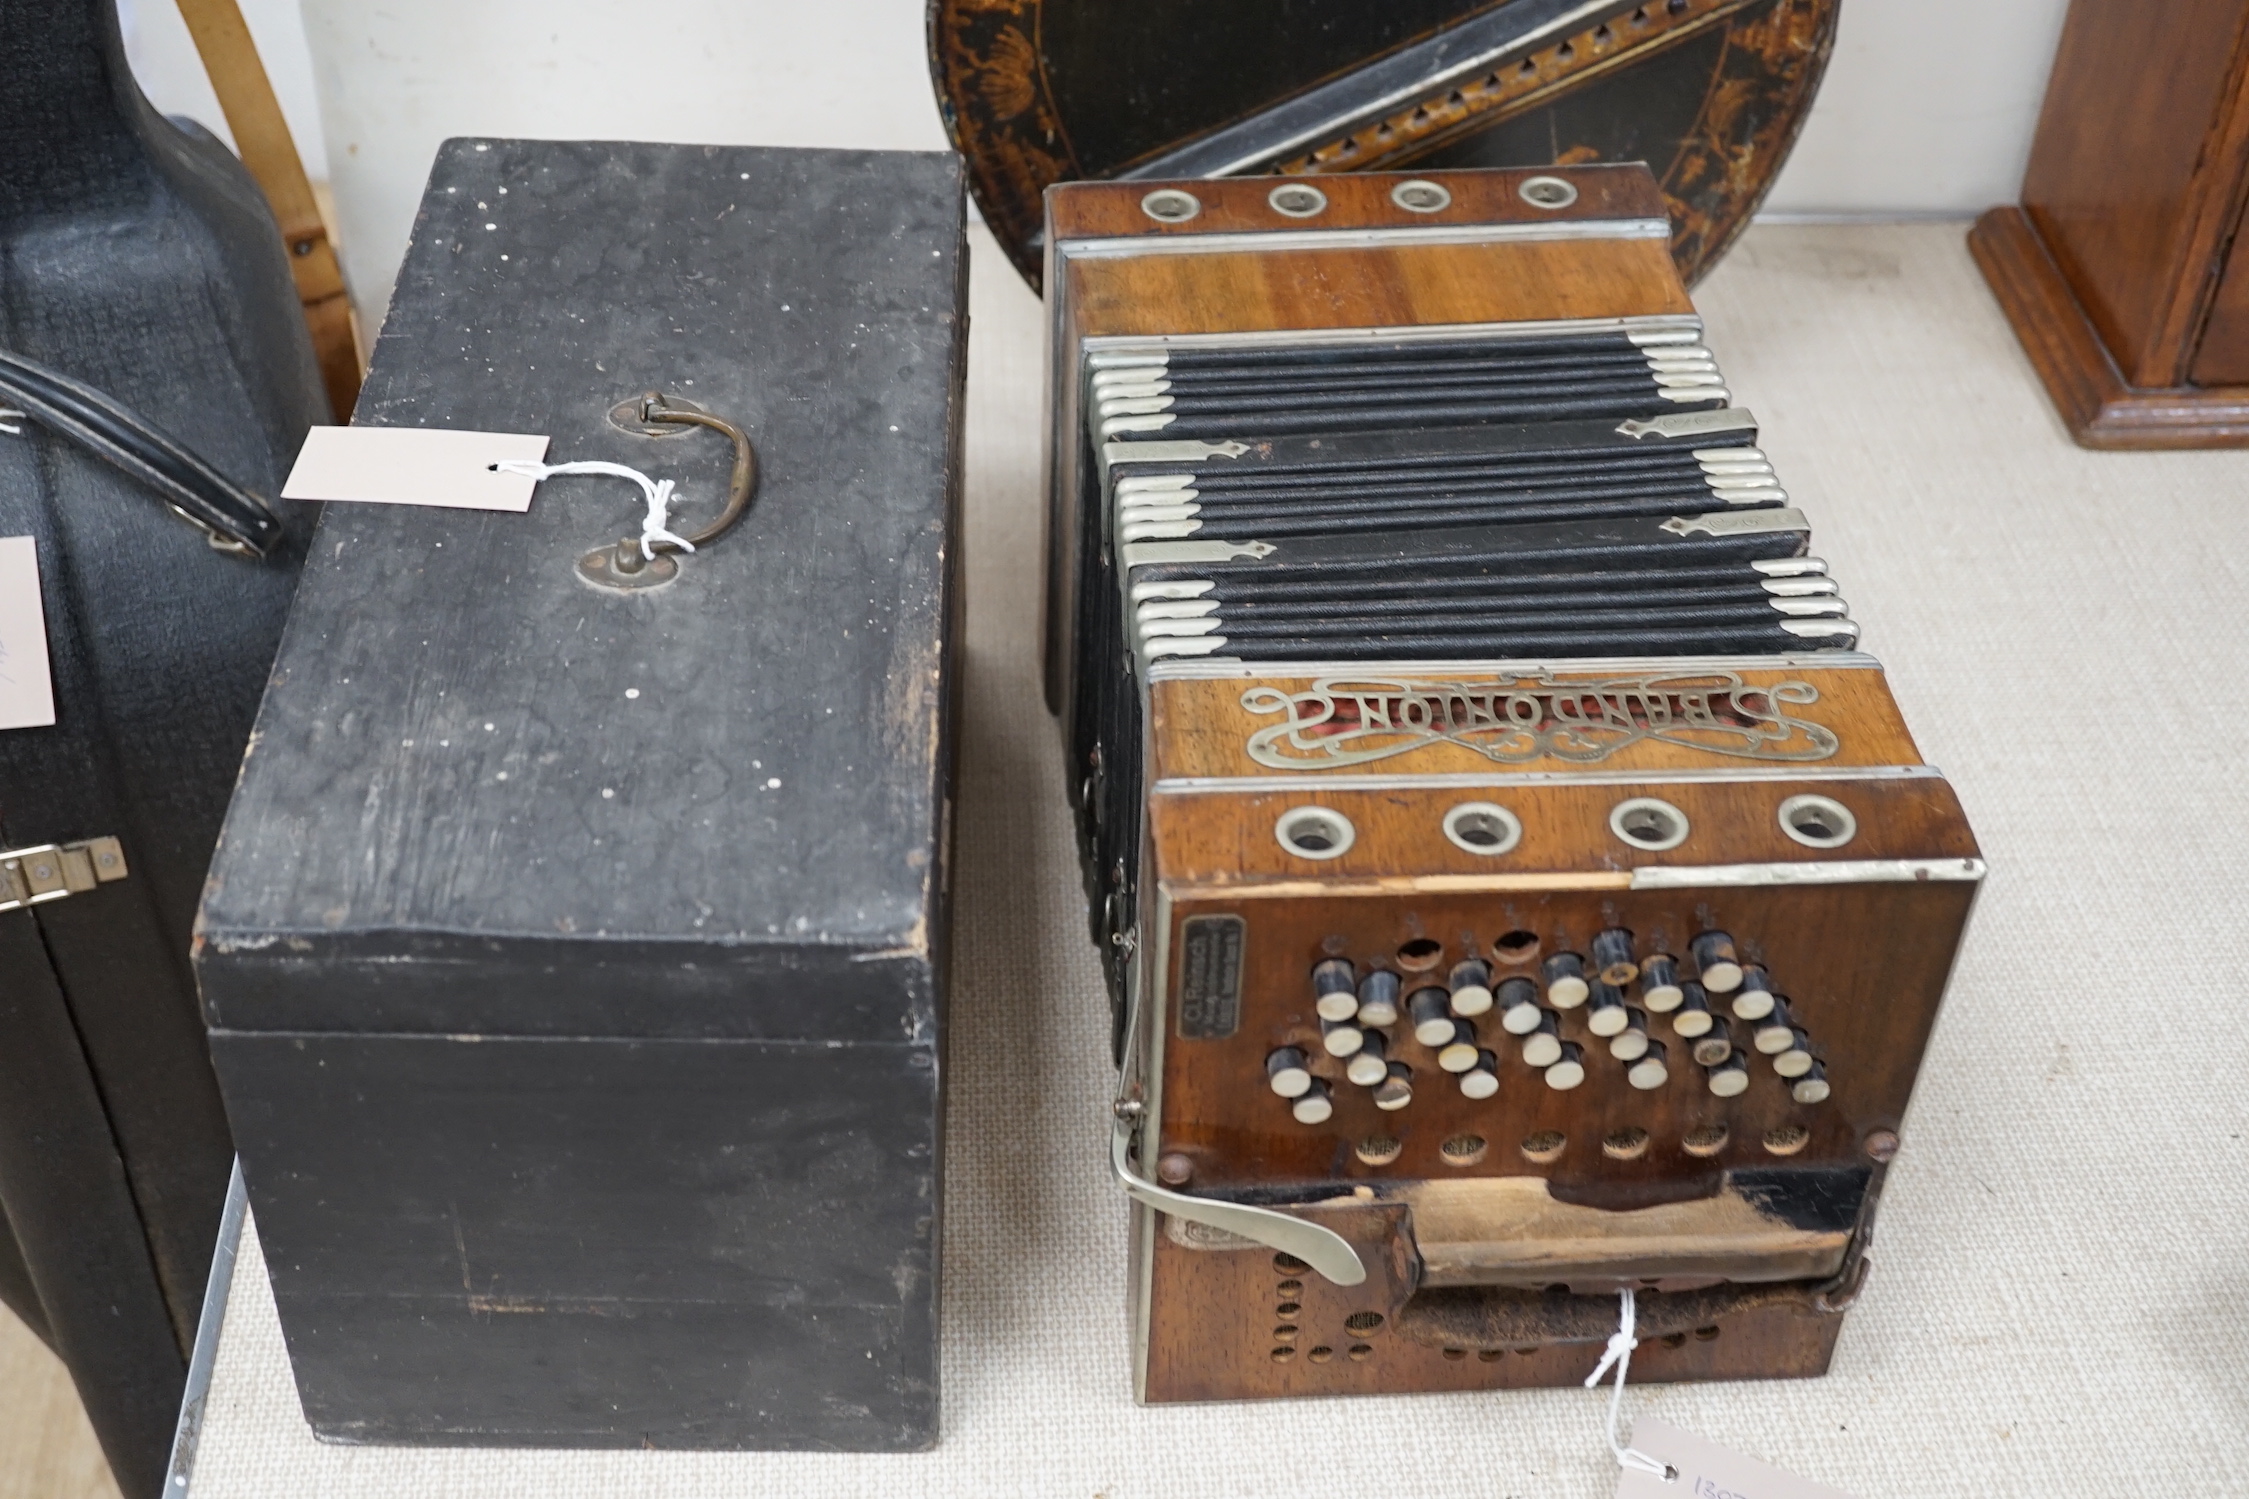 Three 19th century French accordions, two cased, a La Bandeneon for restoration - Image 2 of 3